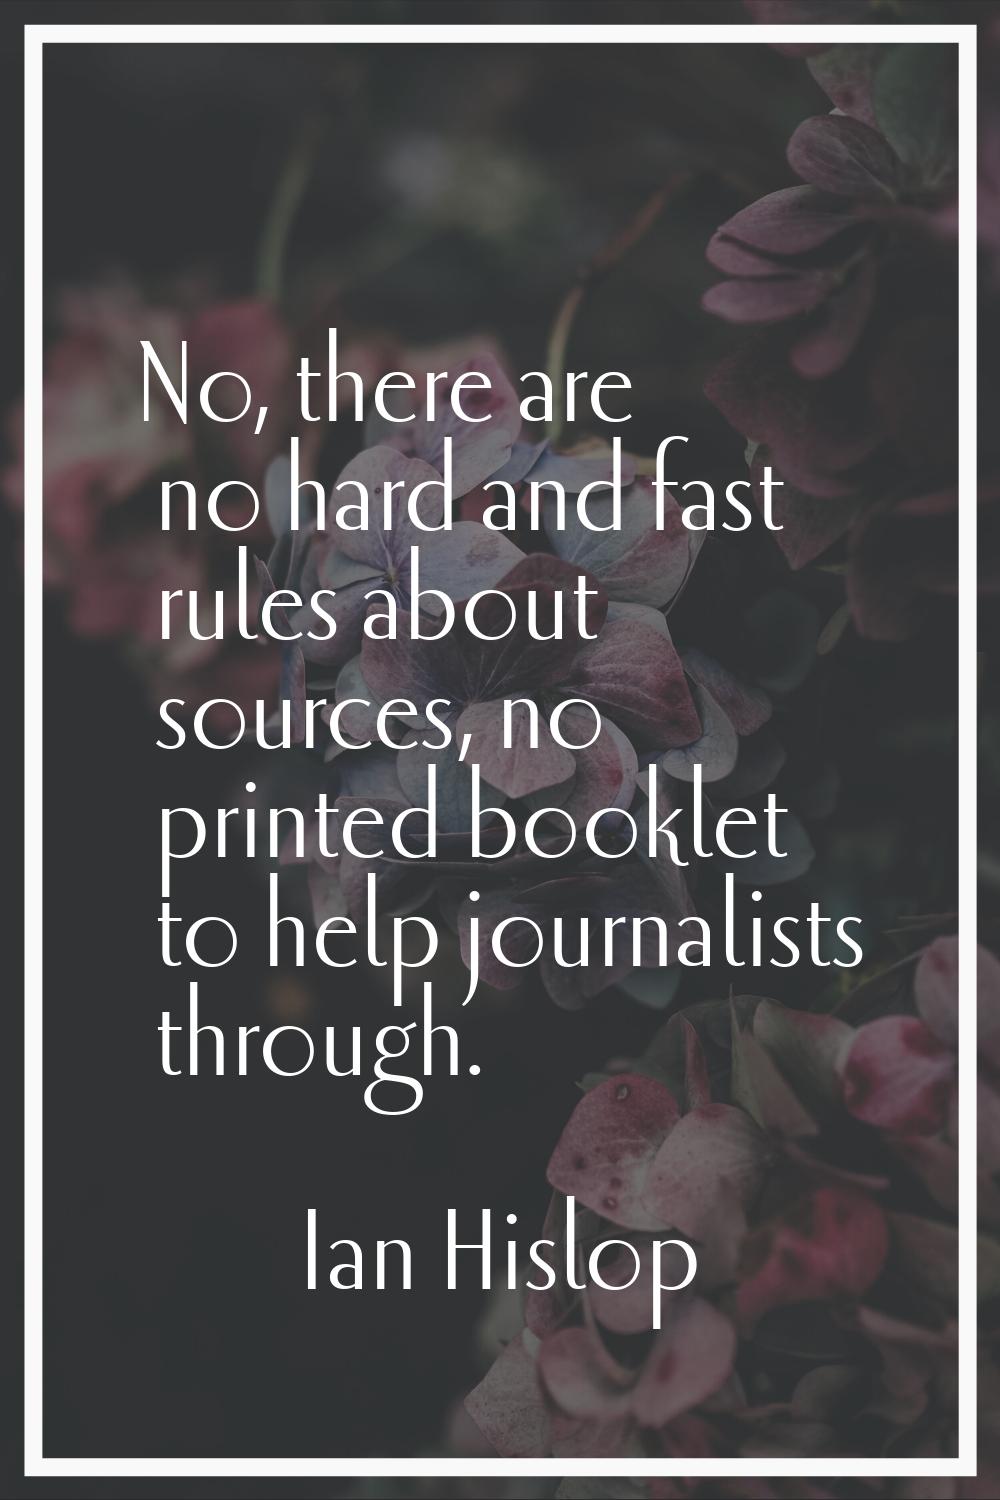 No, there are no hard and fast rules about sources, no printed booklet to help journalists through.